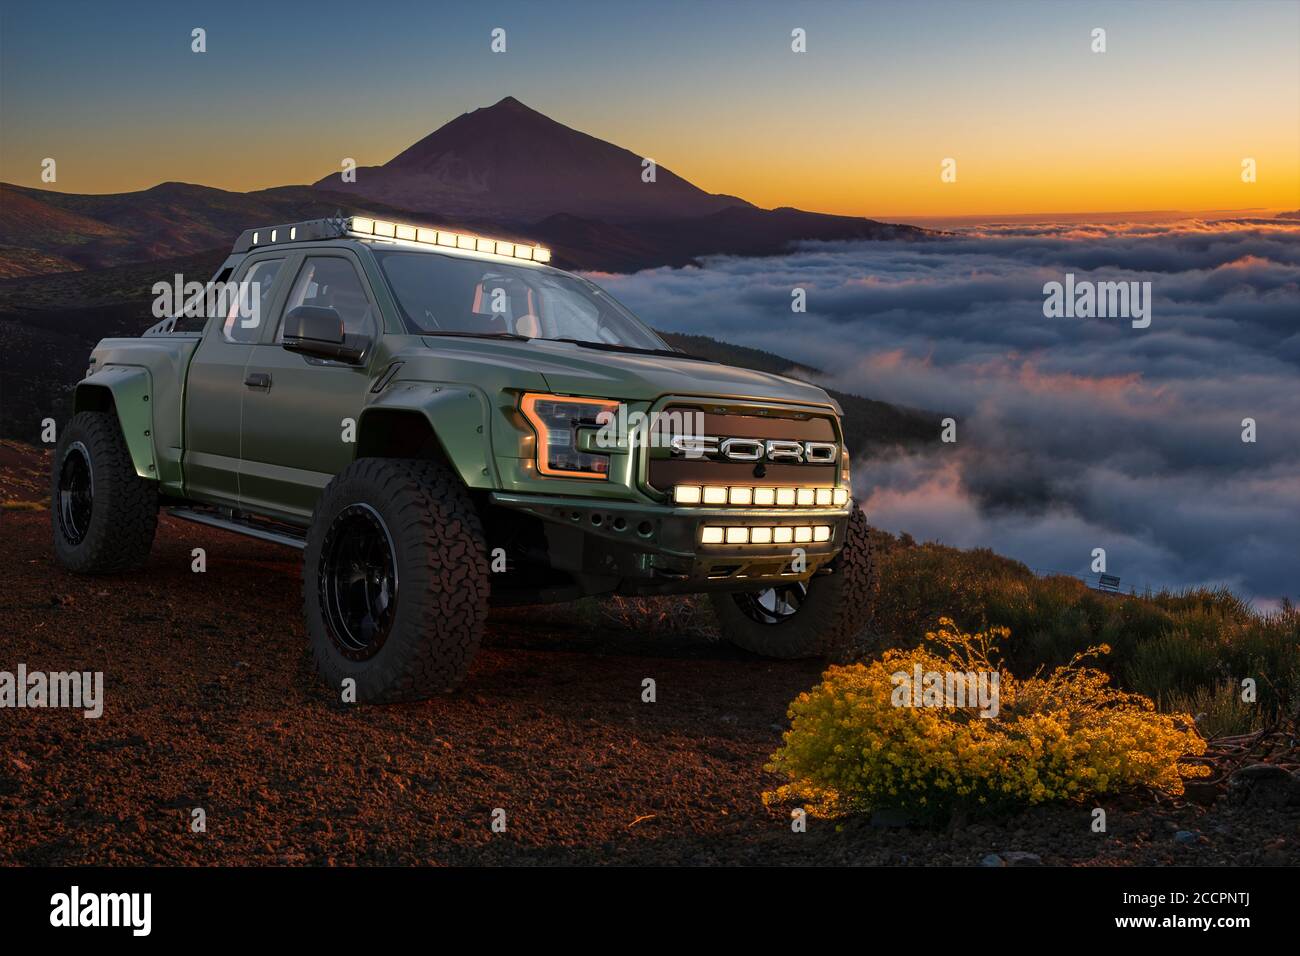 Ford F-150 Raptor - Most Extreme Production Truck On The Planet while driving in extreme off-road Stock Photo